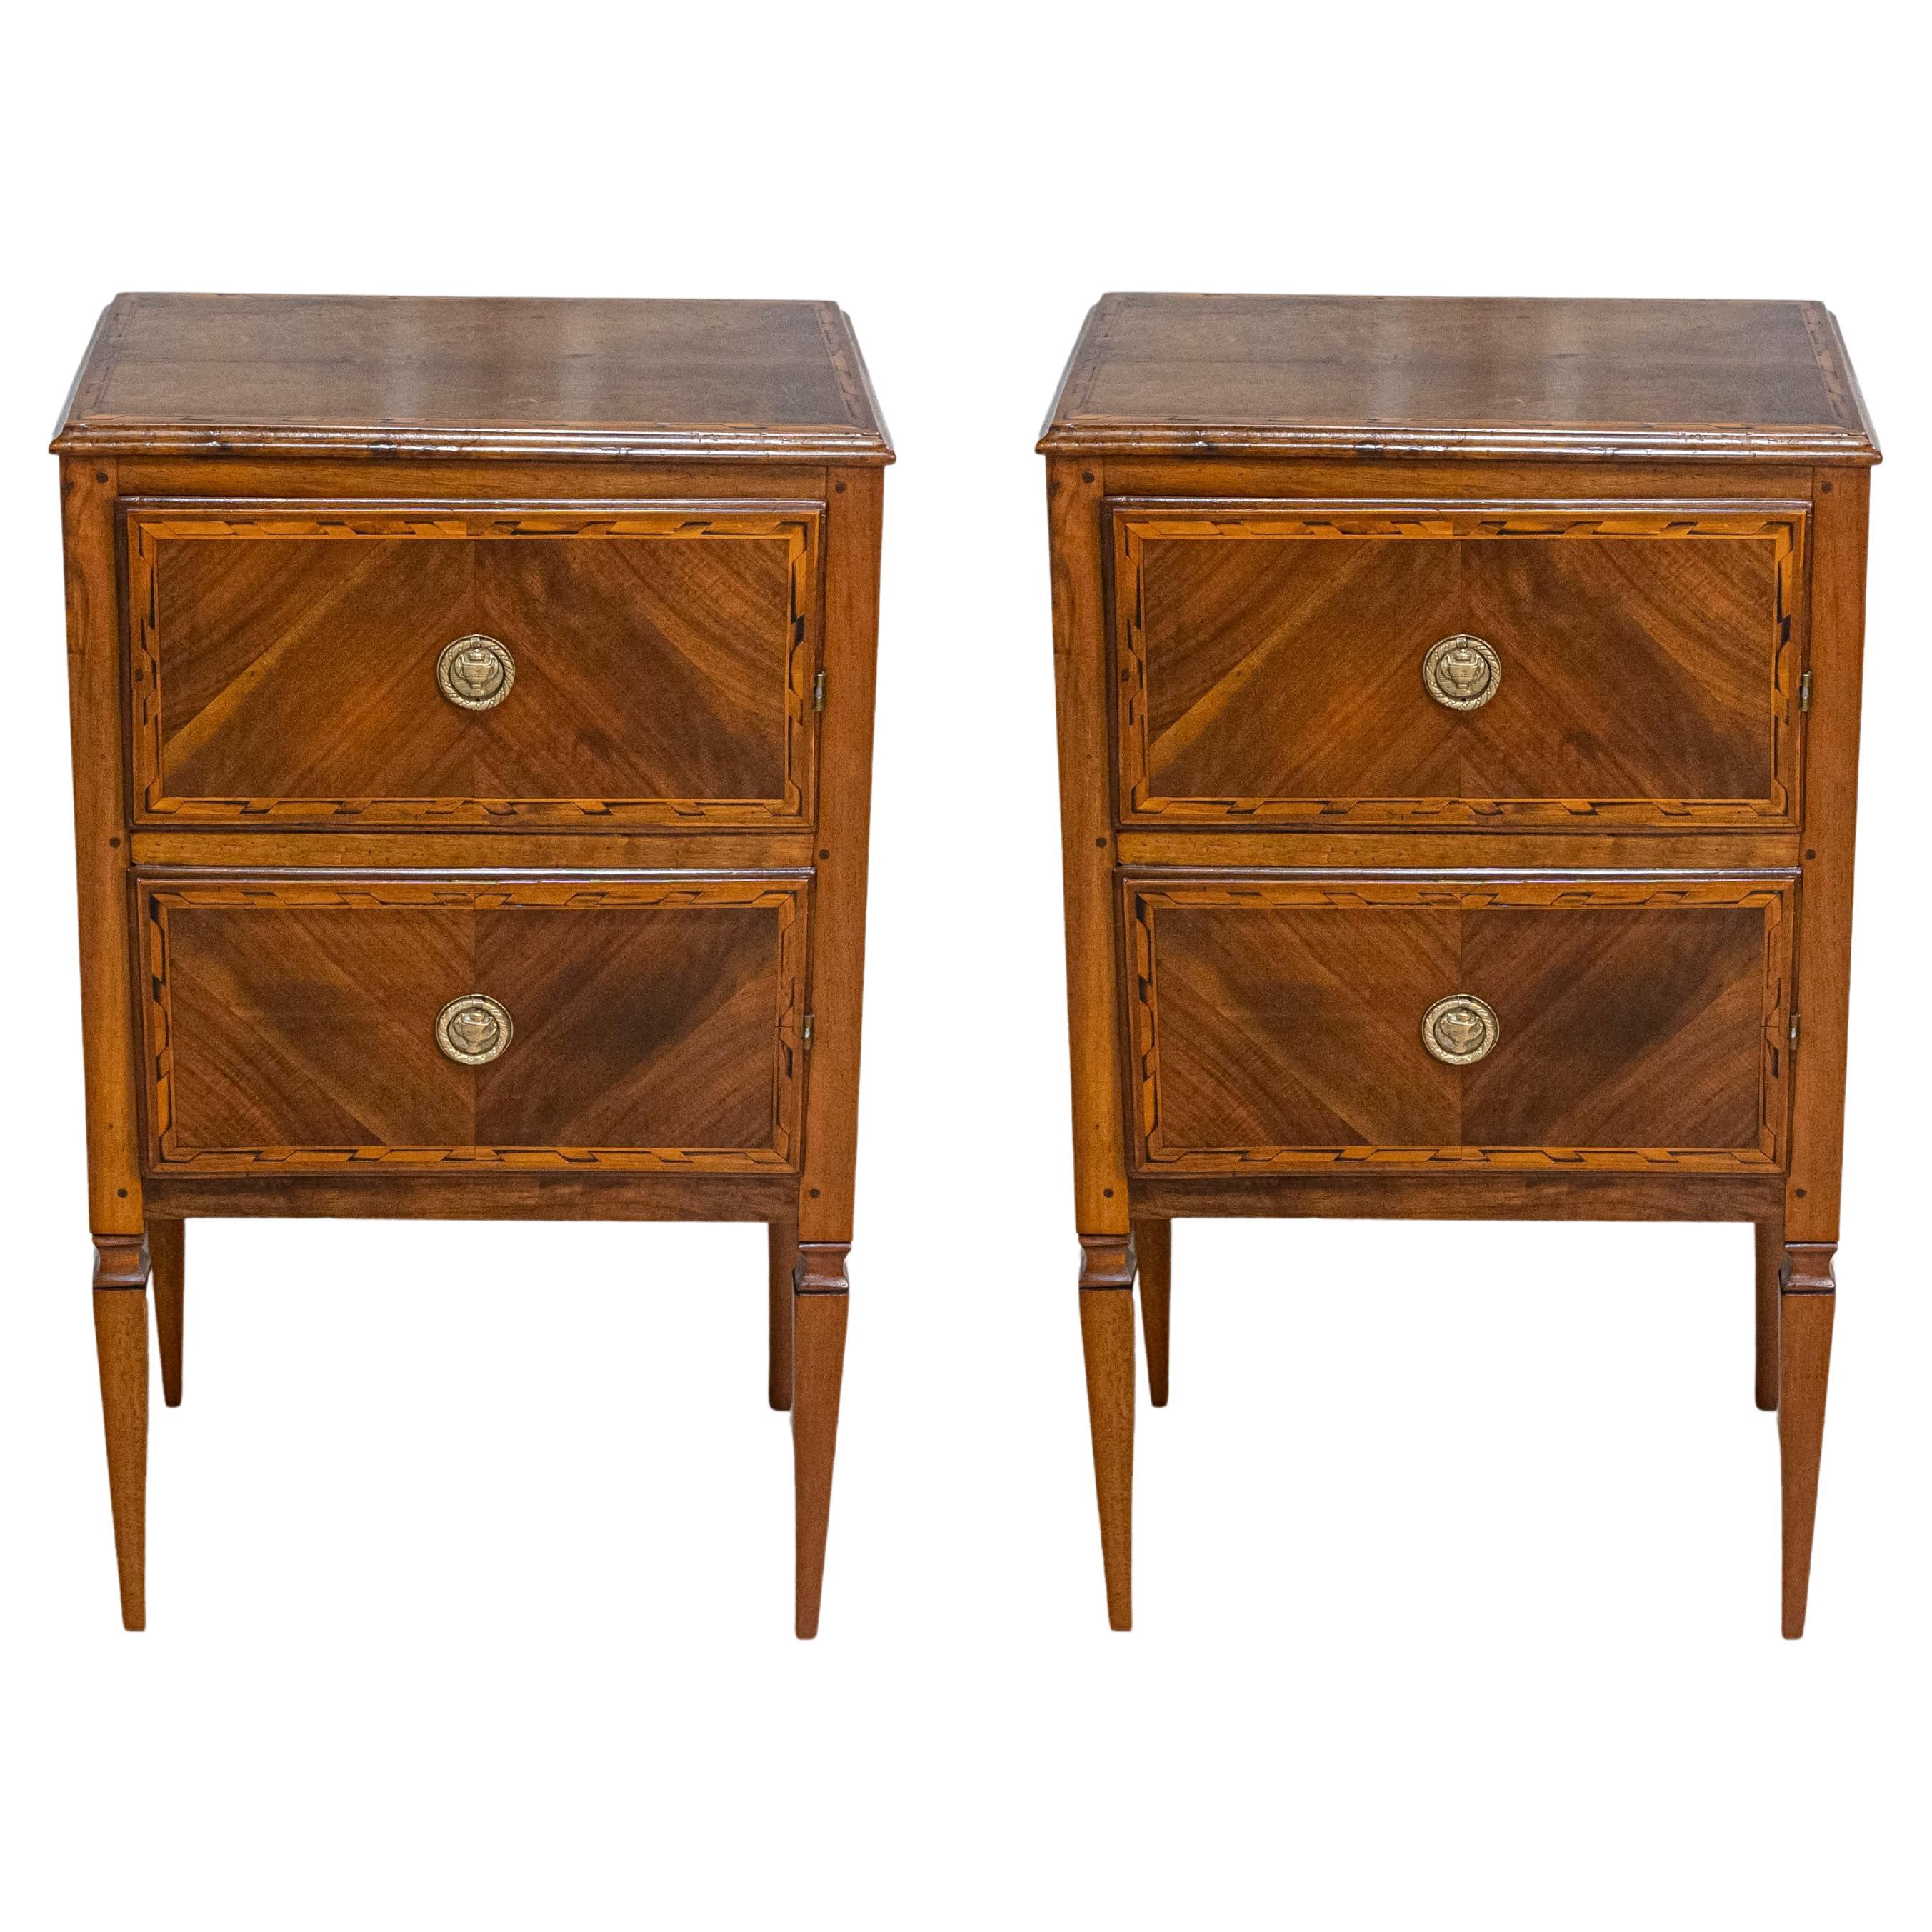 Pair of Italian Neoclassical Style Walnut Nightstands with Bookmatched Veneer For Sale